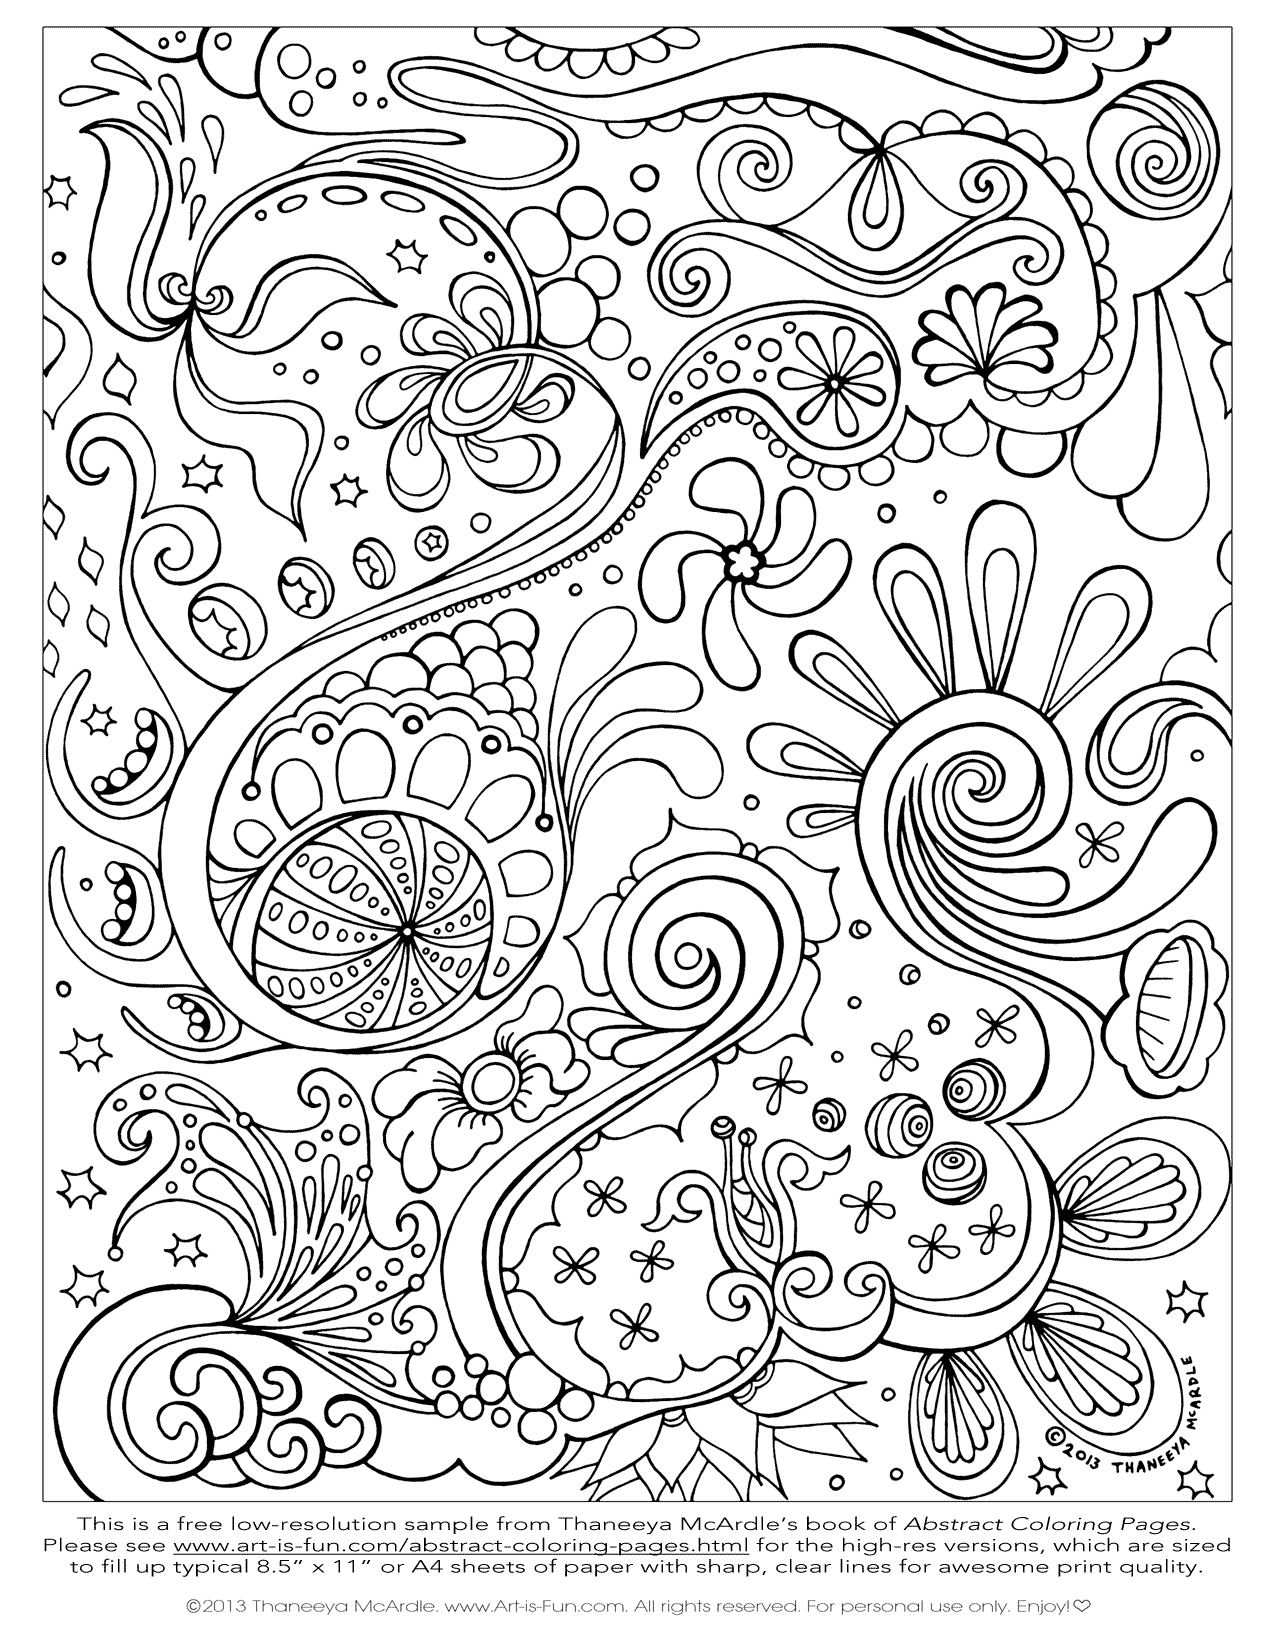 Free Abstract Coloring Page to Print: Detailed, Psychedelic ...